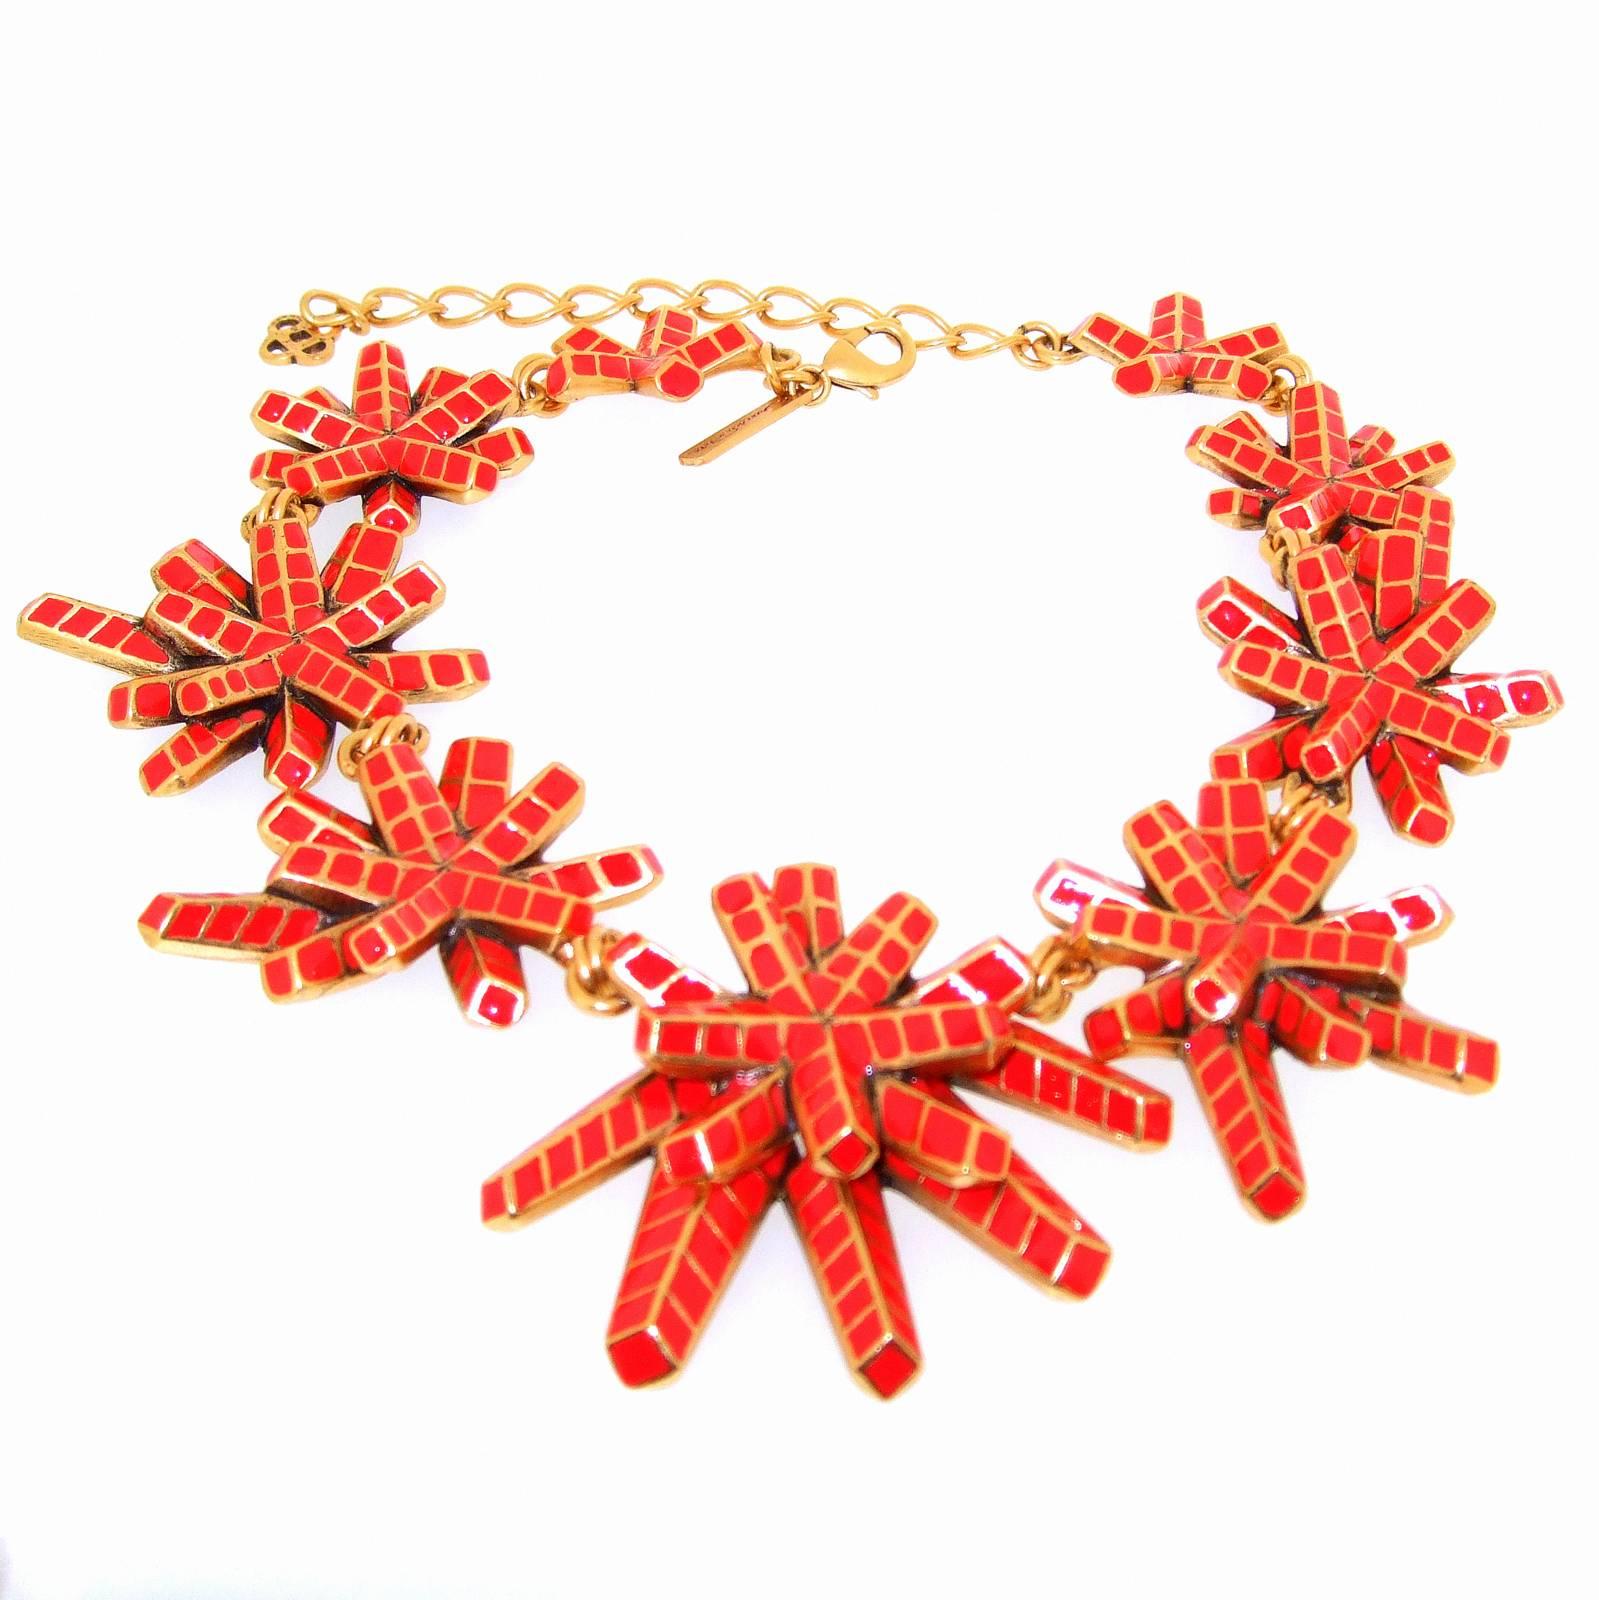 A stunning statement 3D starburst necklace by couture designer Oscar De La Renta. Red enamel on high quality costume metal.

Measures 16-21inches long. With an adjustable chain for length. Main necklace is 15